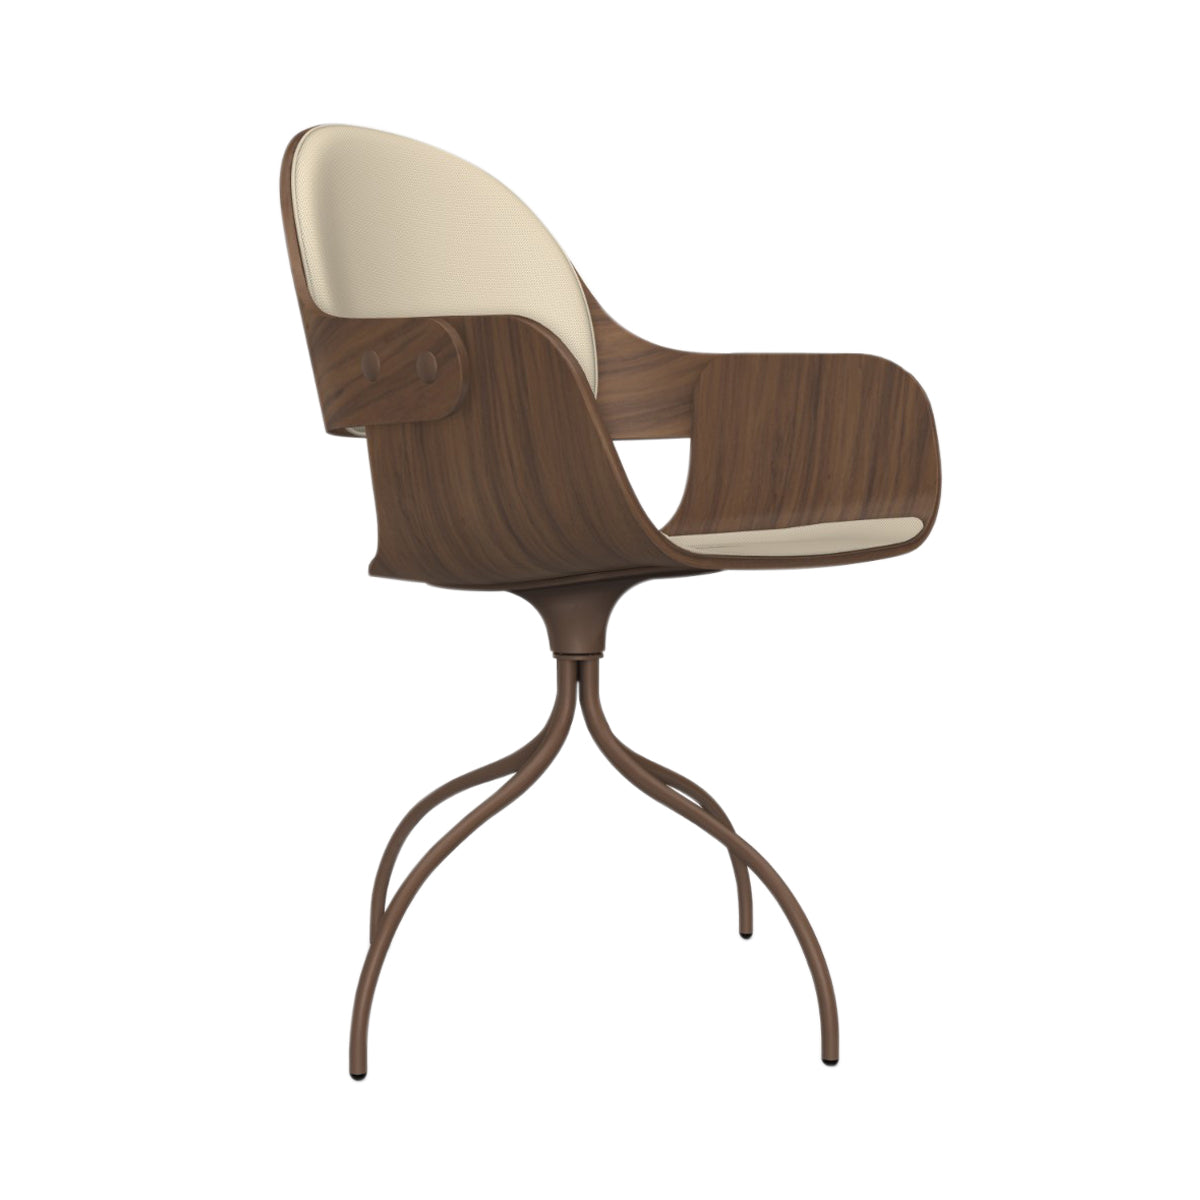 Showtime Nude Chair with Swivel Base: Seat + Backrest Cushion + Walnut + Pale Brown